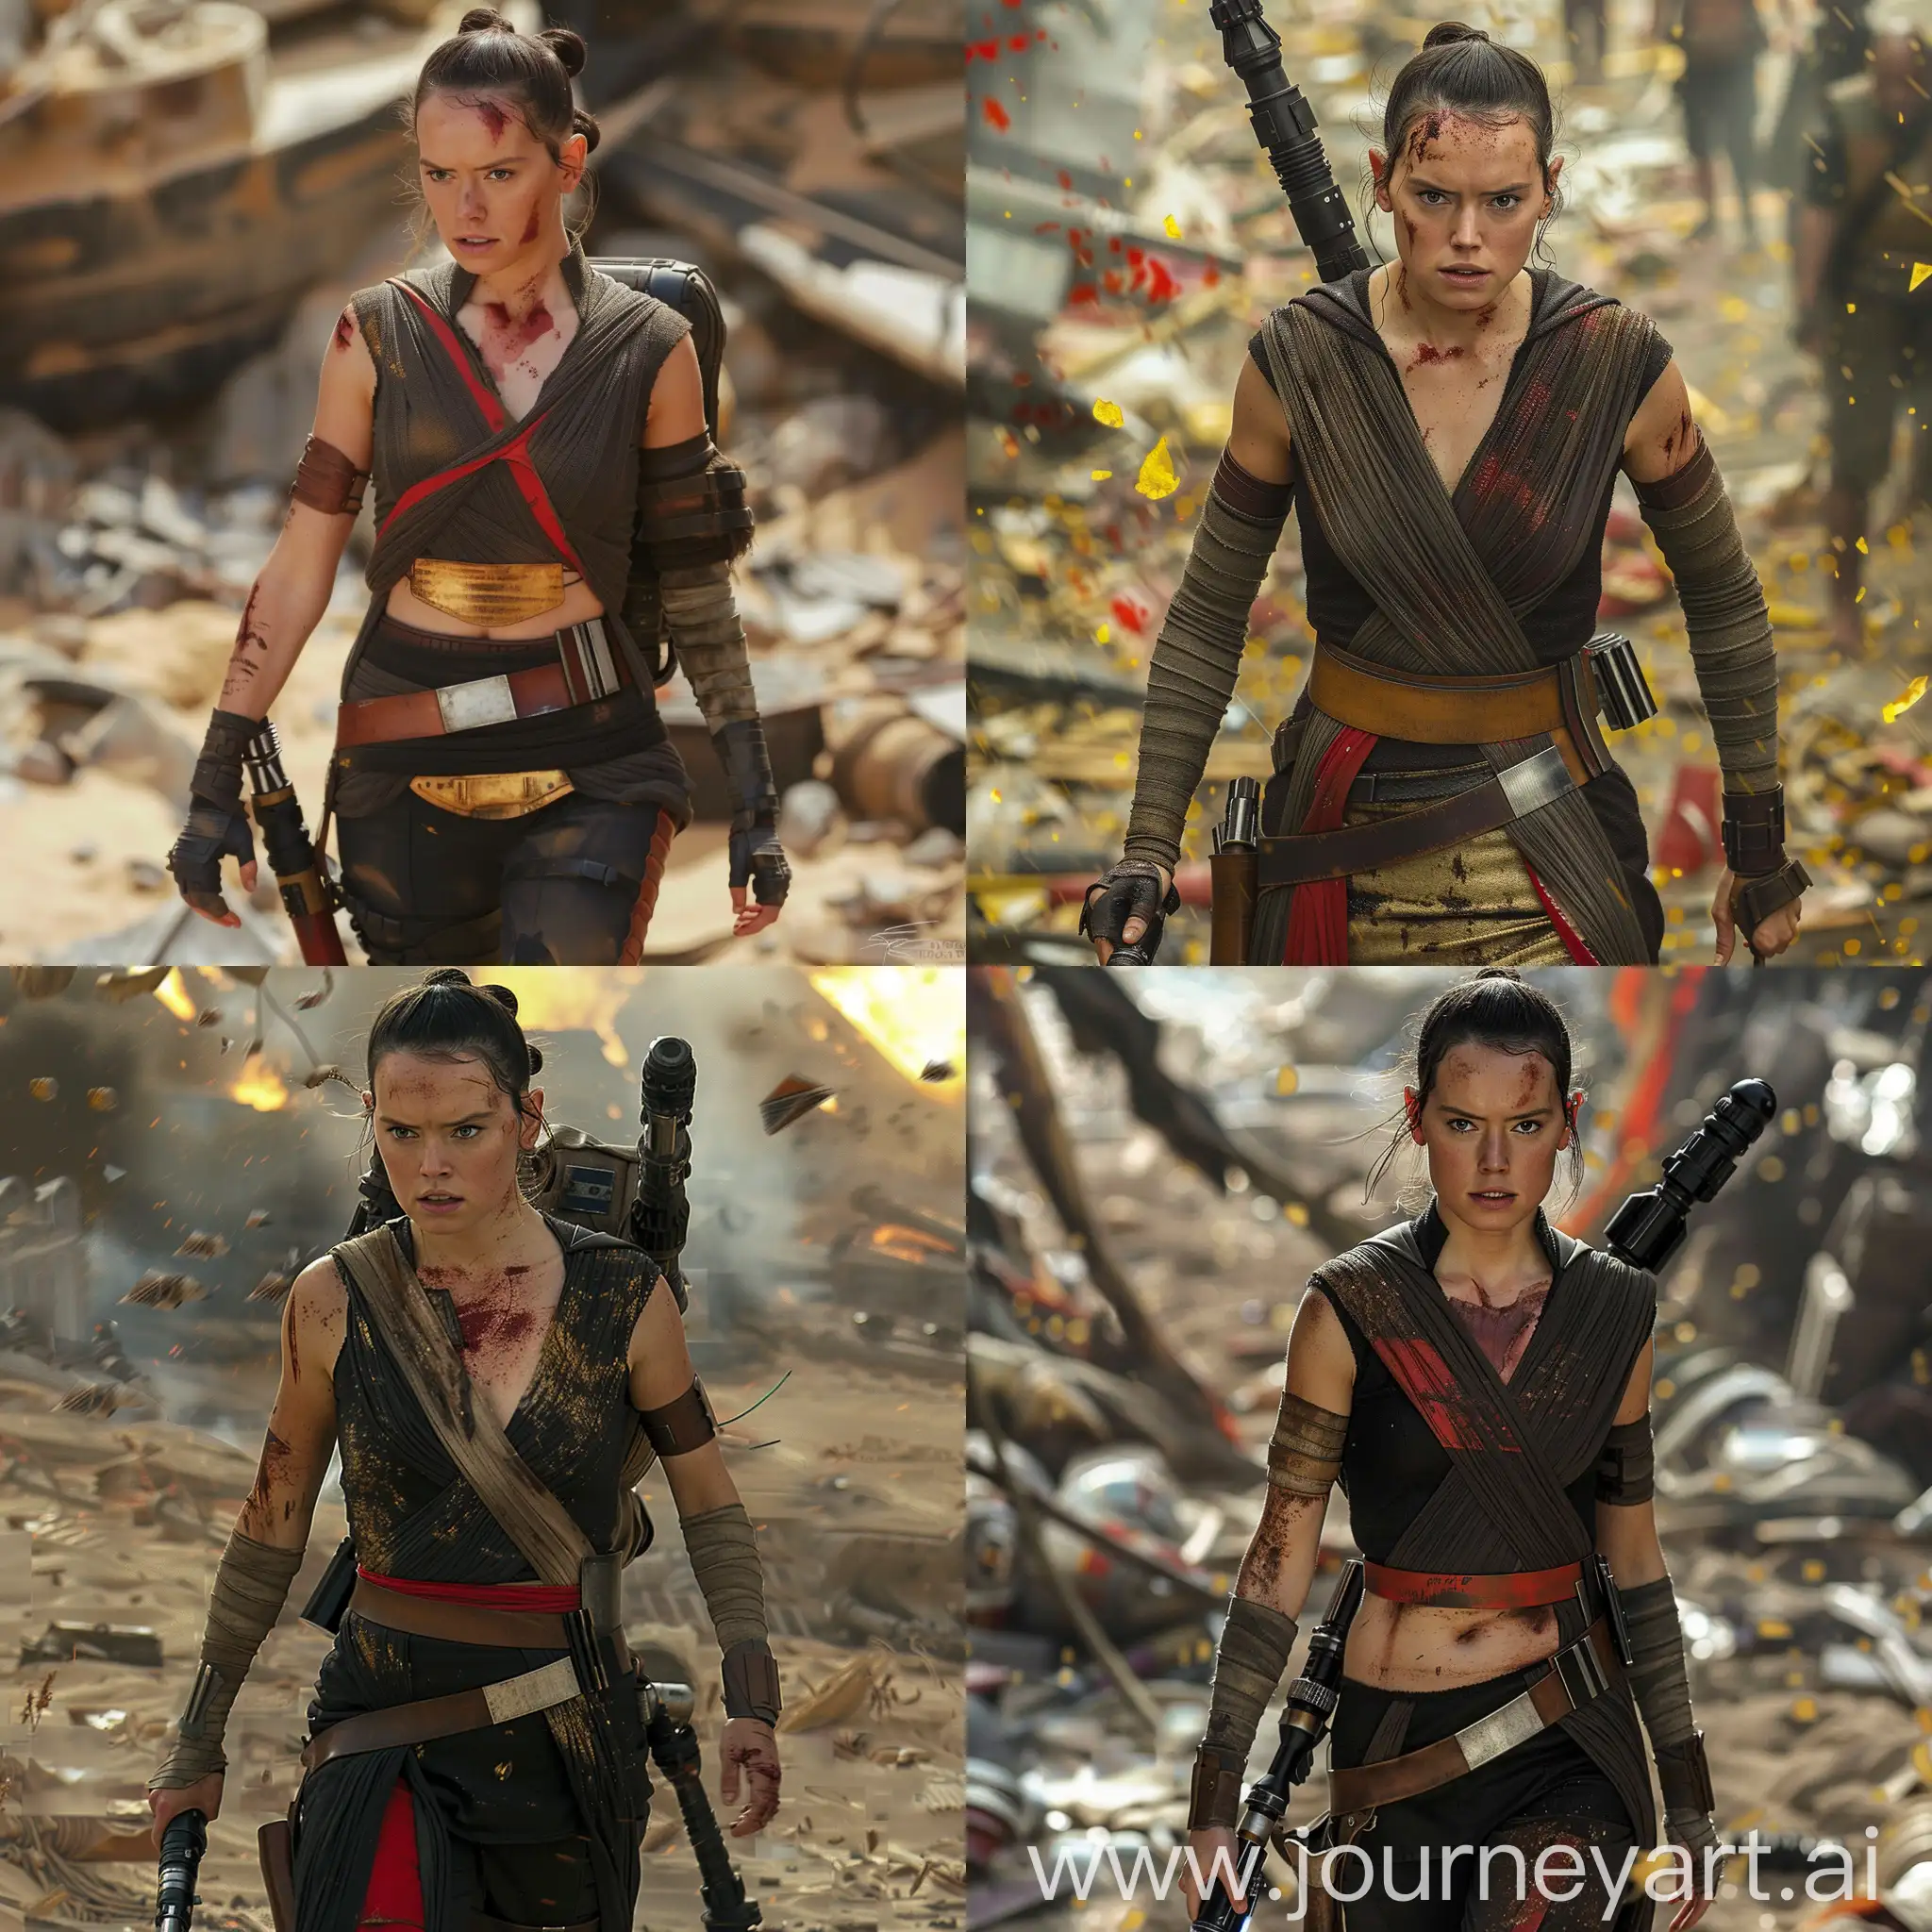 make several images of Rey Skywalker with a new, very tight black, red and gold, modern costume, similar to a corset, with a deflated belly, with a  larger bust , thin arms , very athletic, with scars and dirt, wearing a backpack and saber, like a wise Jedi master, walking like a traveler in a space environment with lots of debris, looking at the camera, camera zooms in close to her face